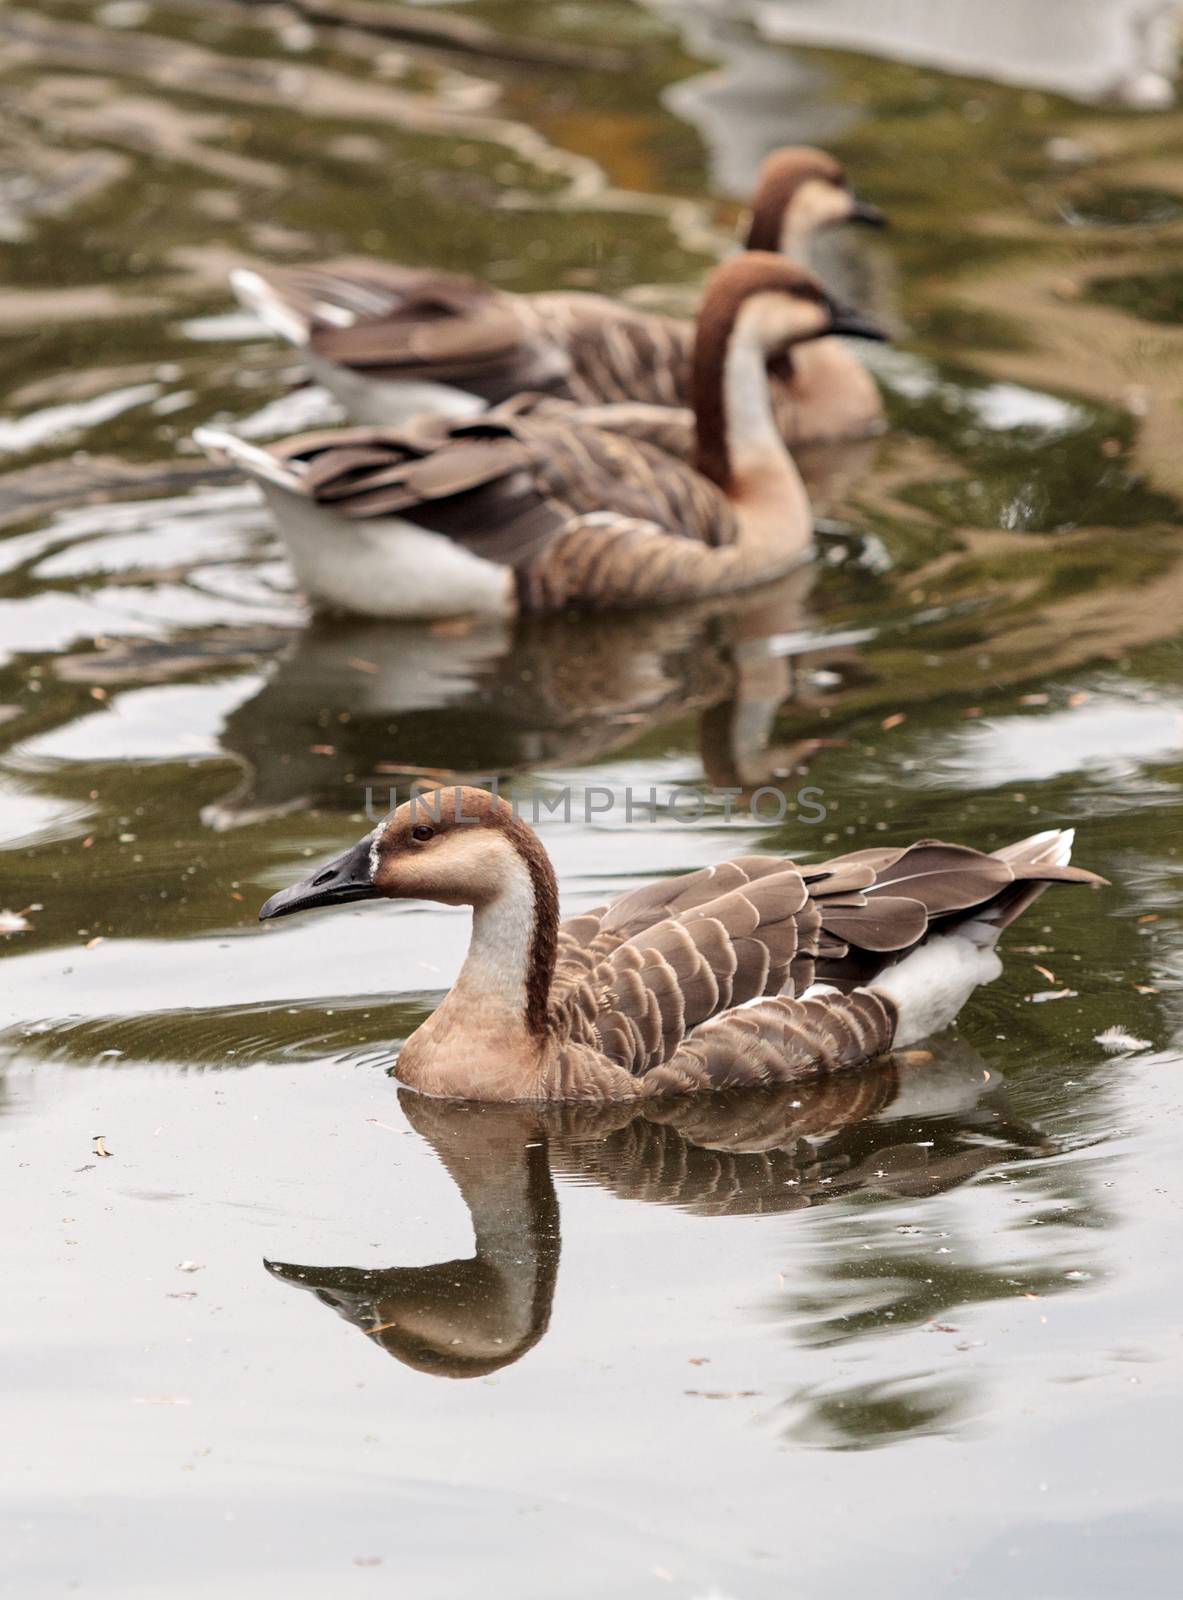 Hawaiian goose called Branta sandvicensis and also Nene near a pond in spring